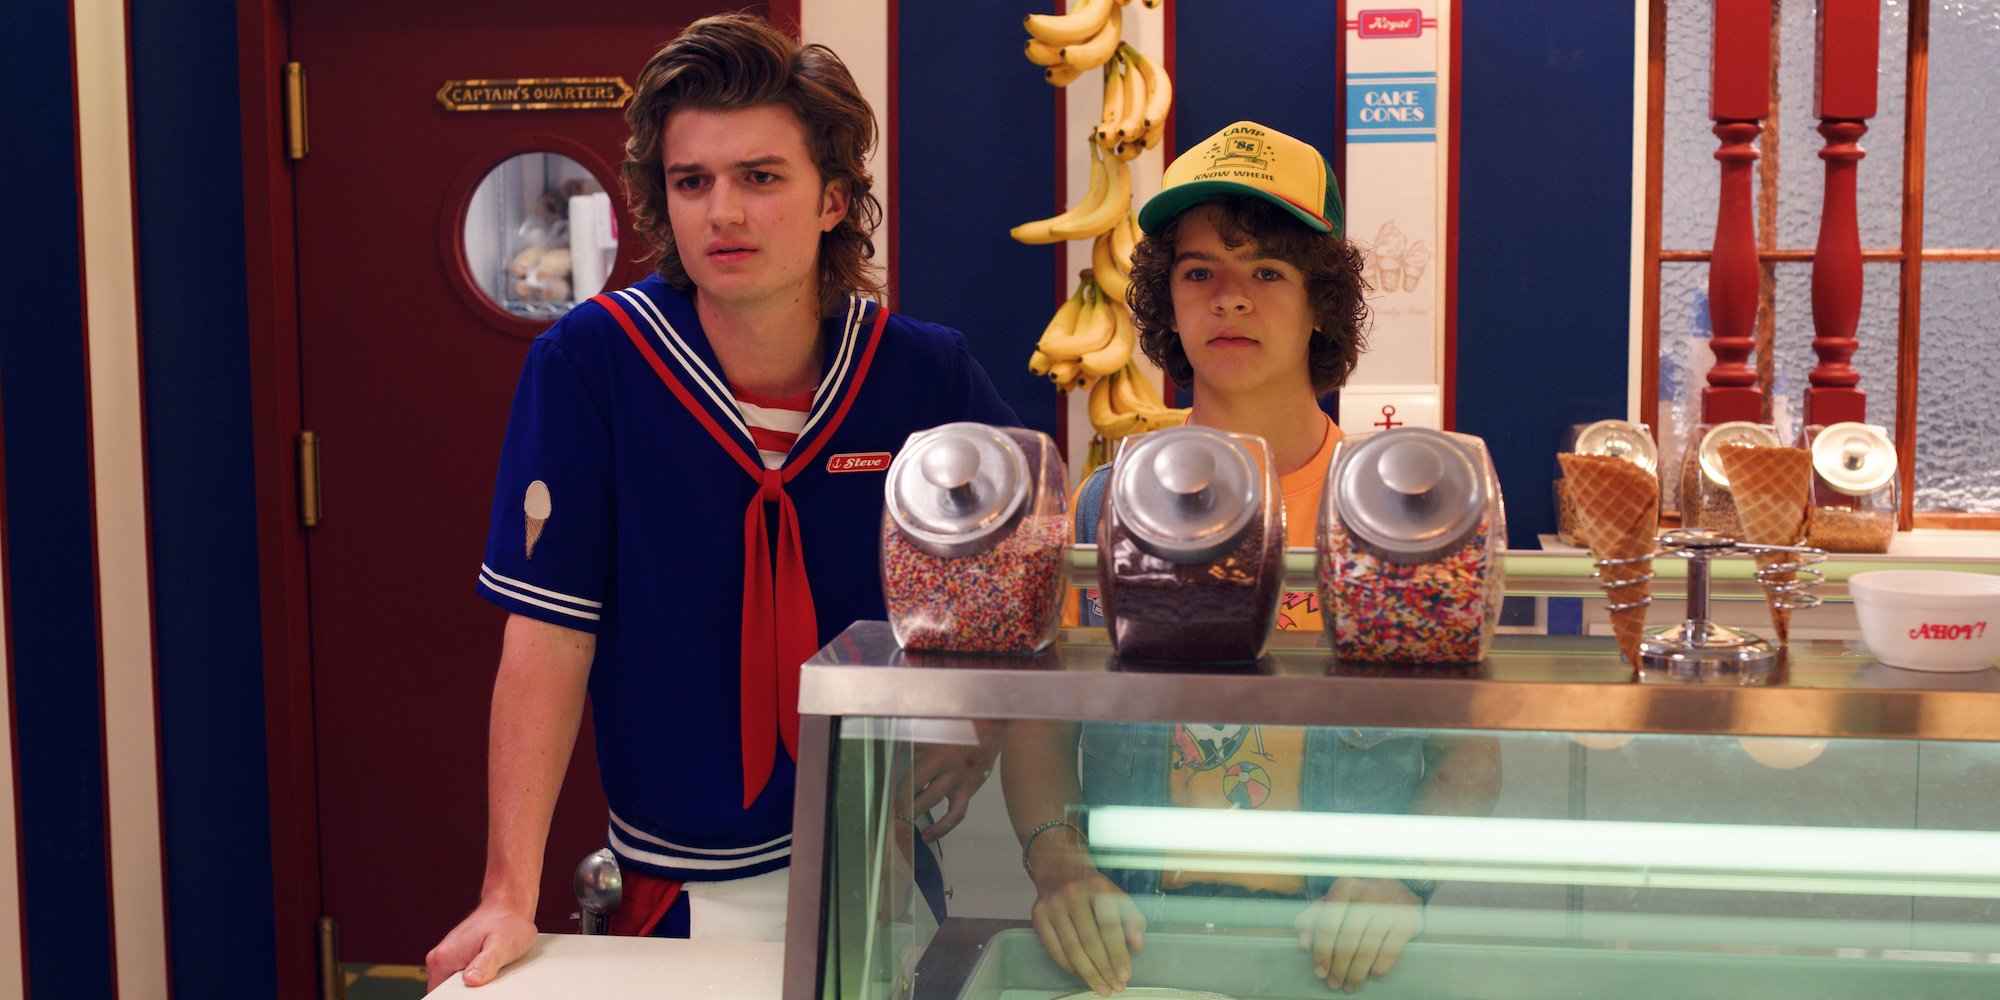 'Stranger Things' fan favorites Steve and Dustin standing behind the counter at Scoops Ahoy in a production still from season 3